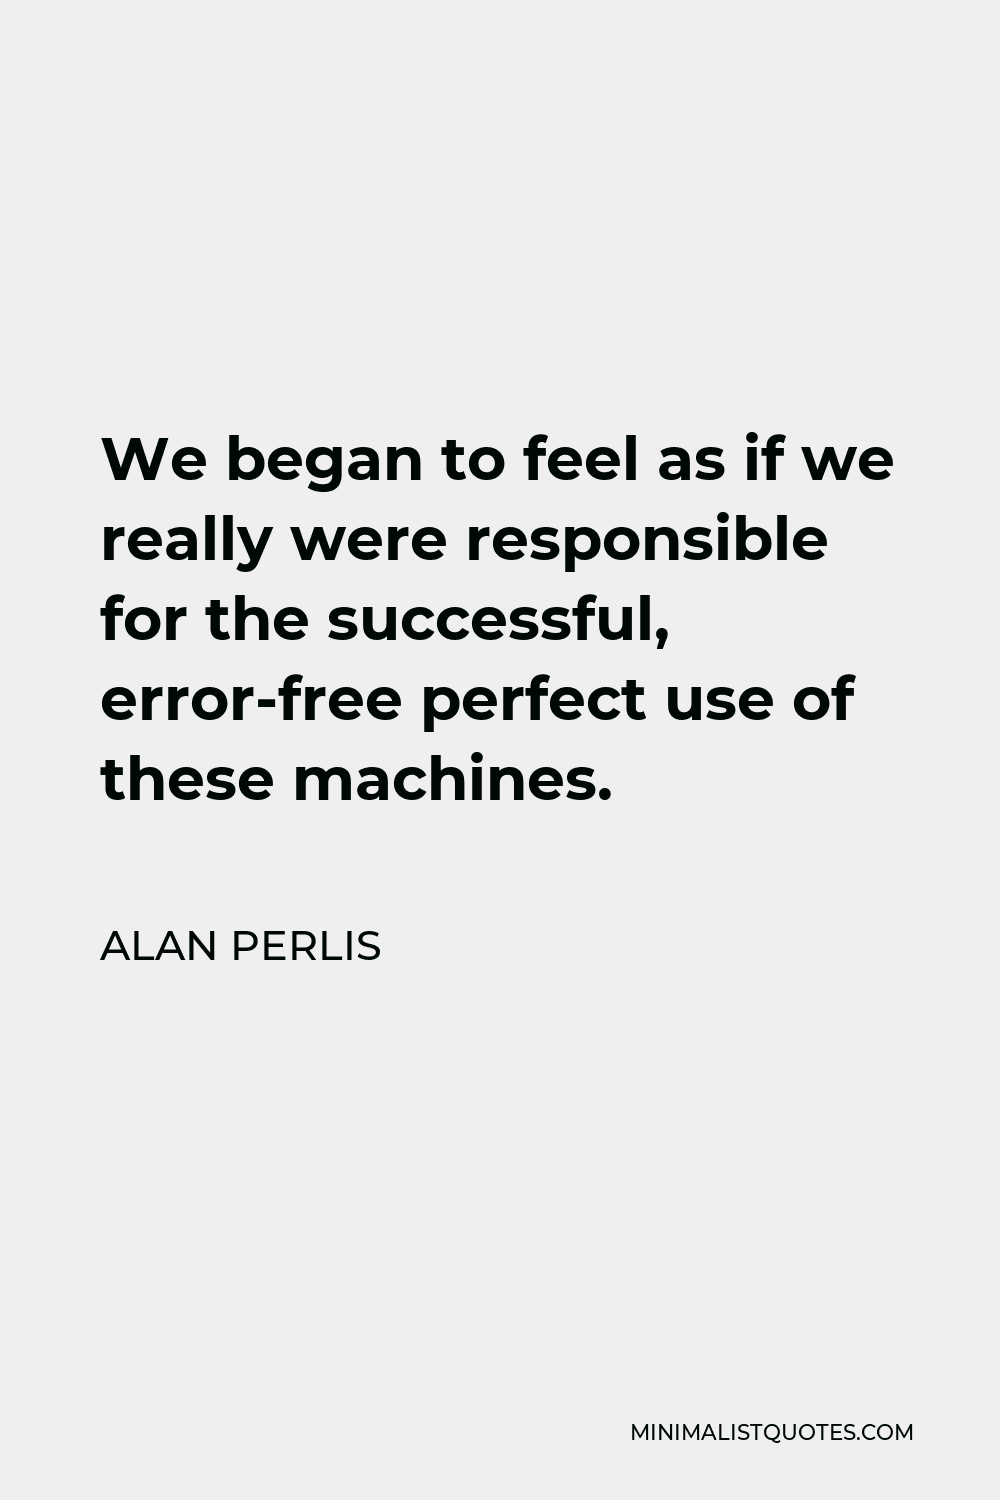 Alan Perlis Quote - We began to feel as if we really were responsible for the successful, error-free perfect use of these machines.